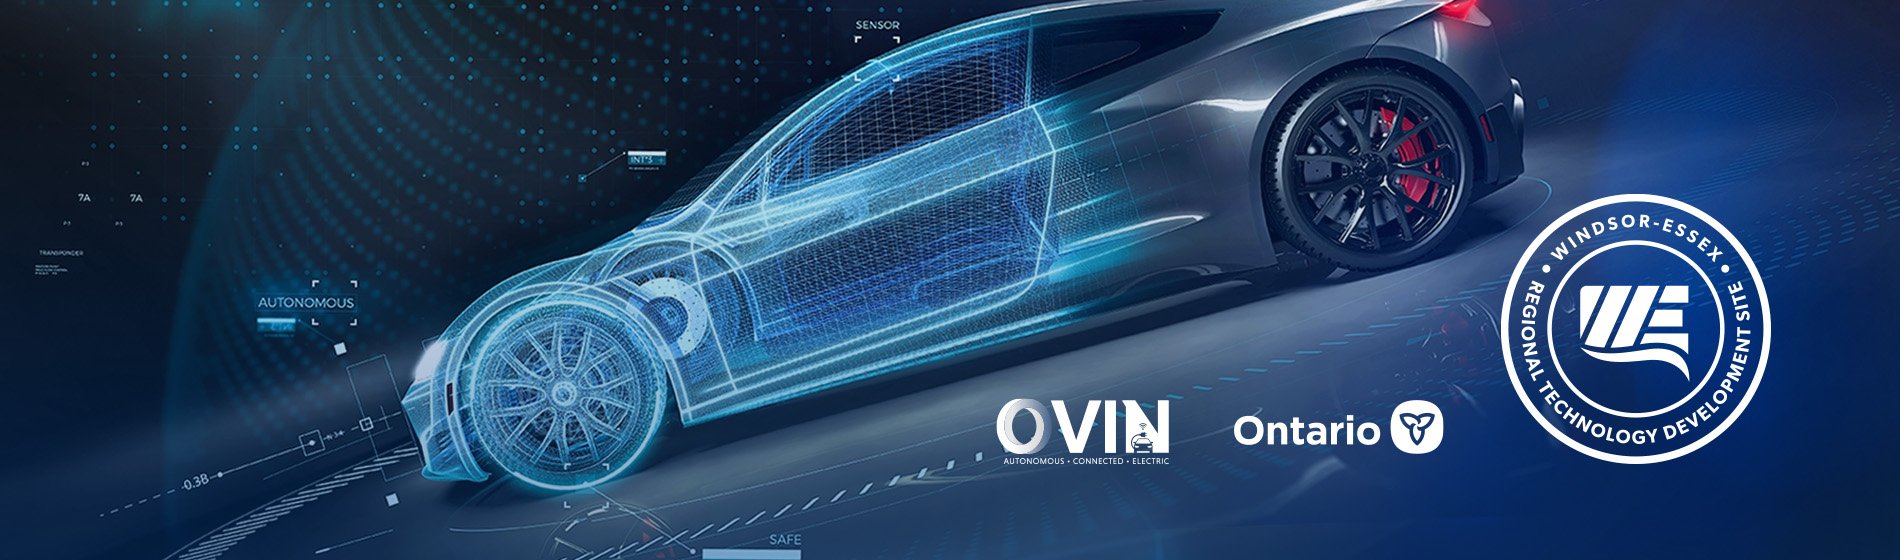 CAD drawing of a car with Ontario Vehicle Innovation Network (OVIN) , Ontario, and Windsor-Essex Regional Technology Development logos